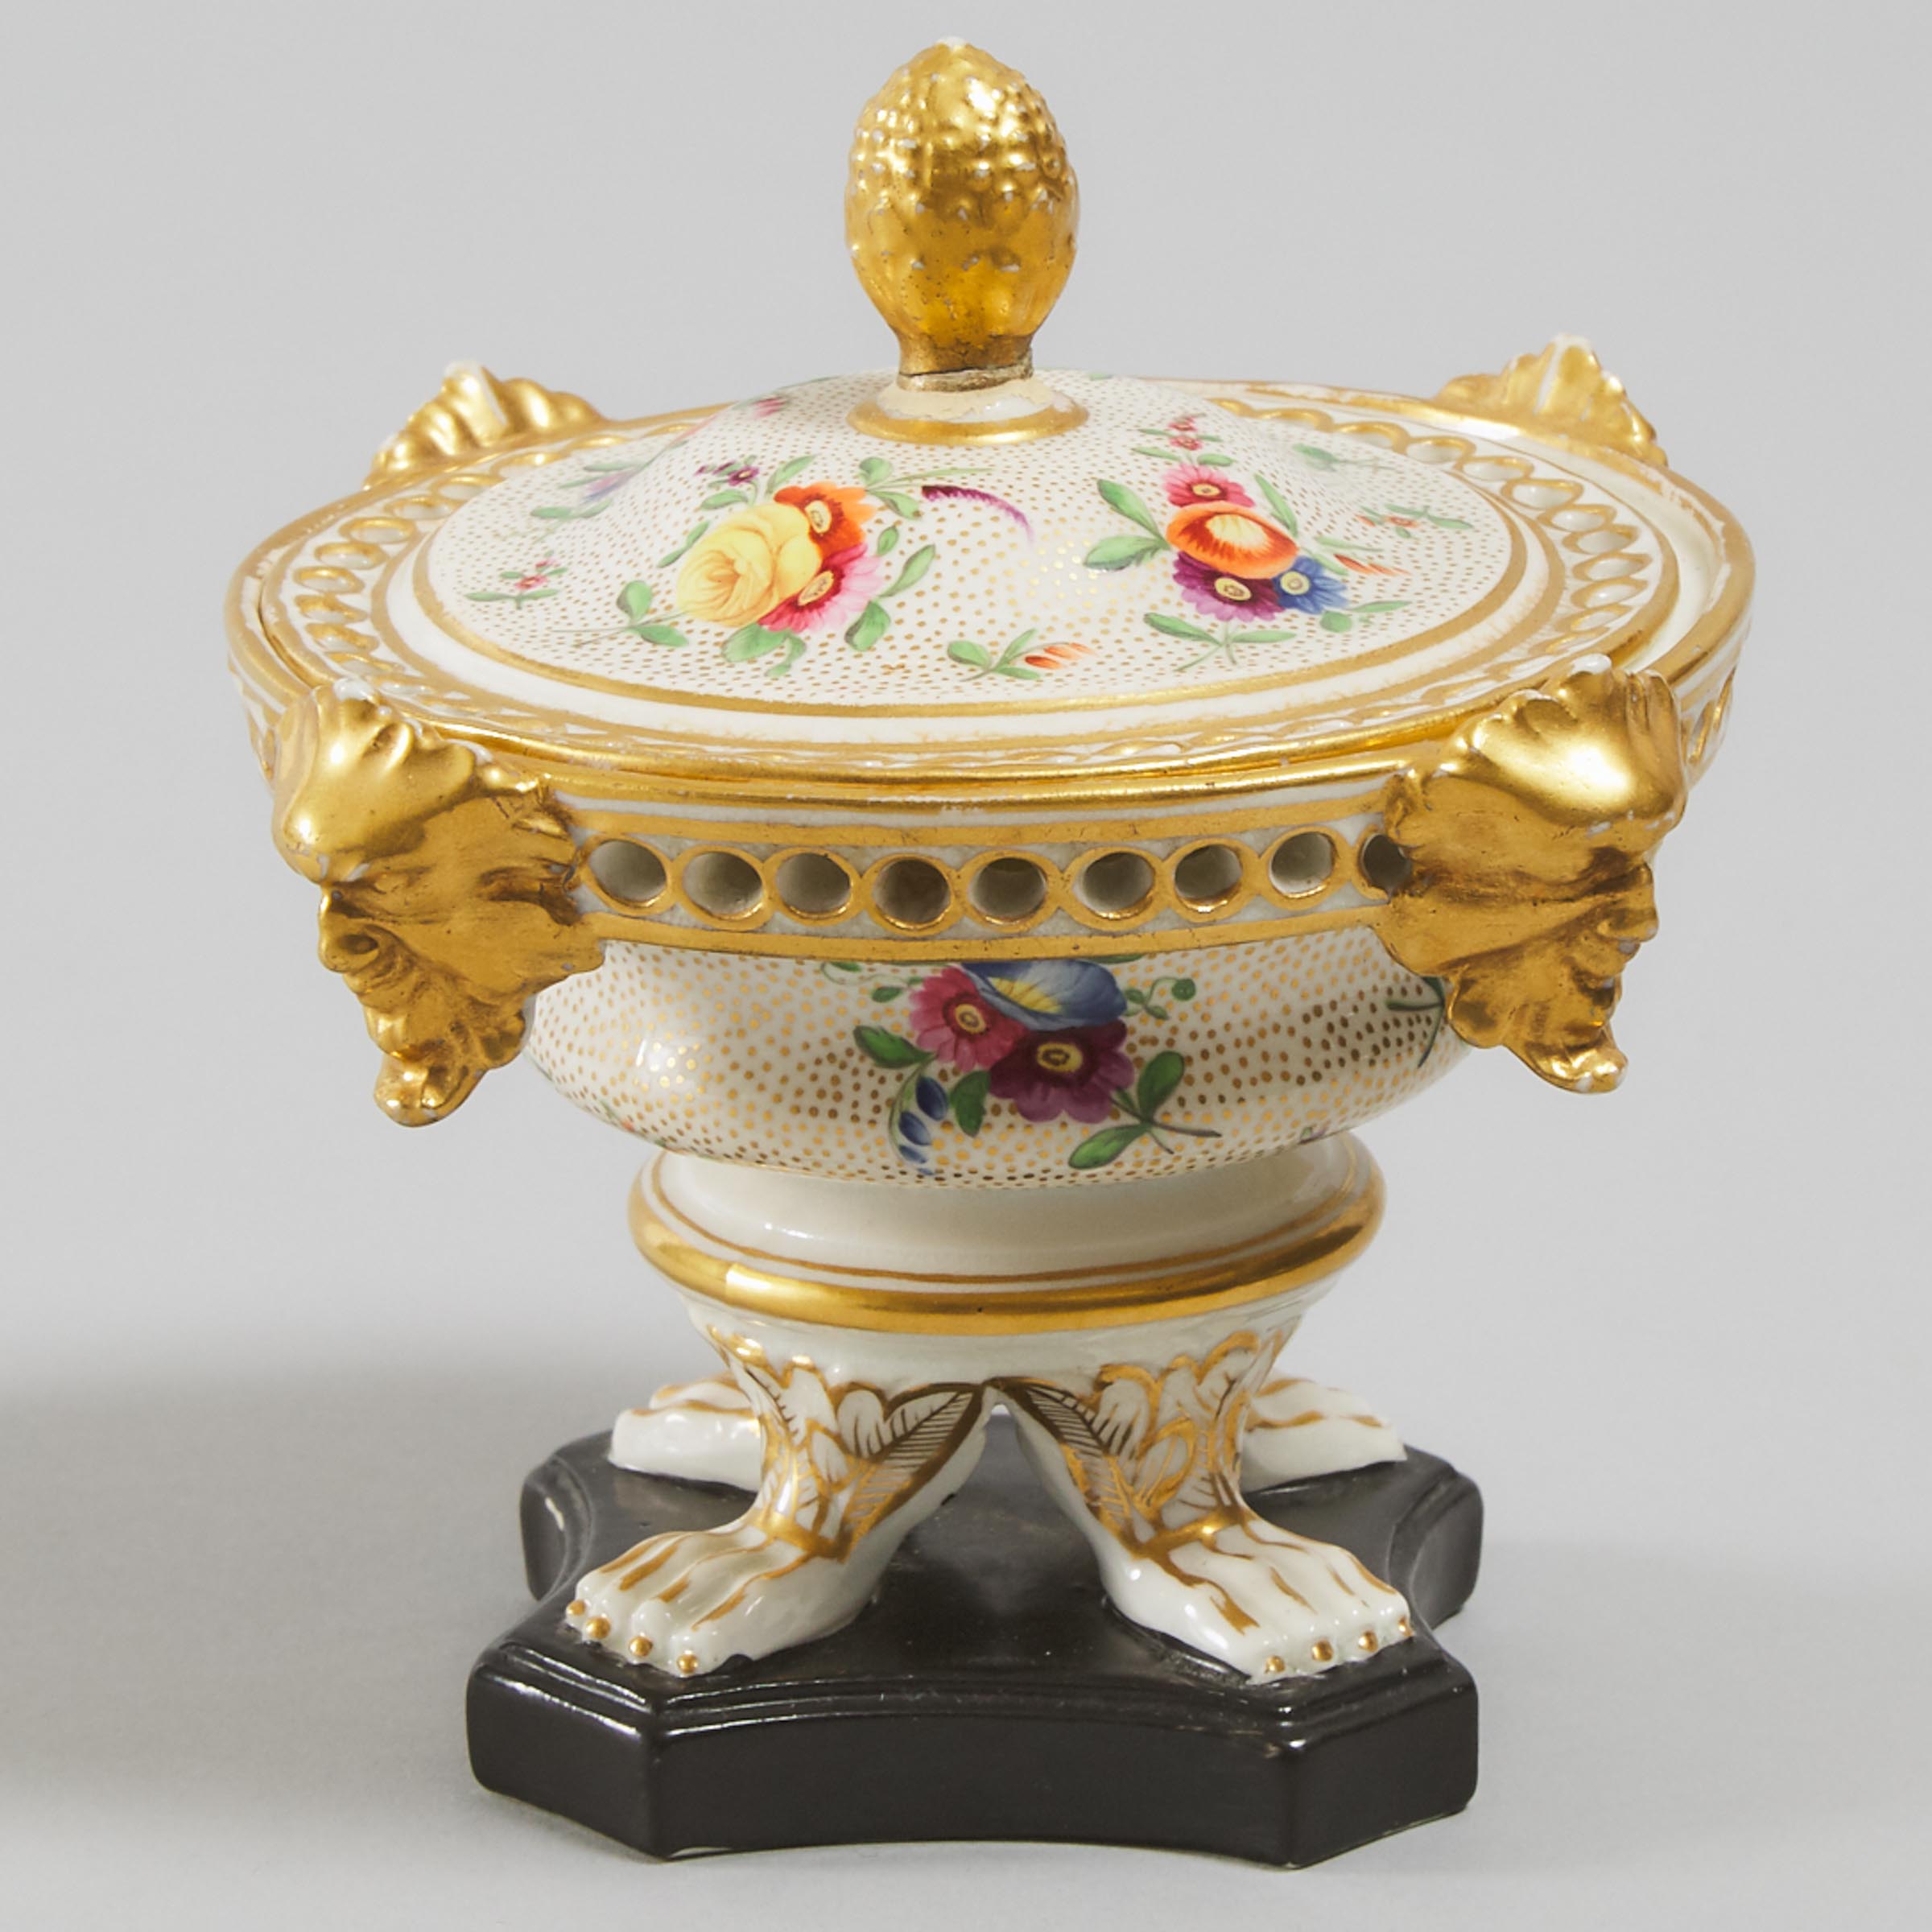 Derby Pastille Burner, early 19th century